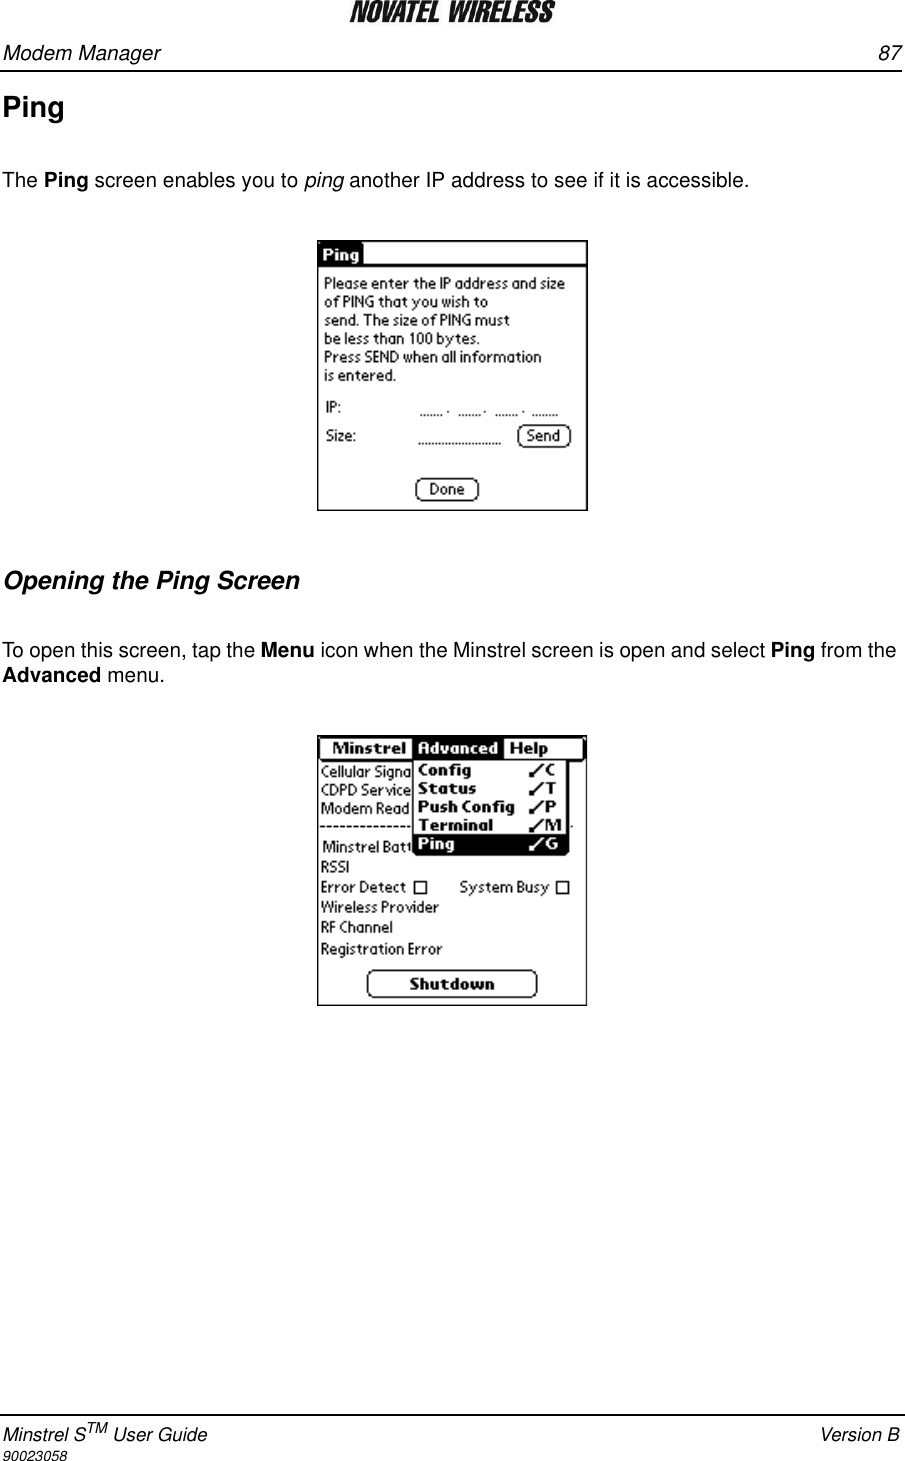 Modem Manager 87Minstrel STM User Guide Version B90023058PingThe Ping screen enables you to ping another IP address to see if it is accessible.  Opening the Ping ScreenTo open this screen, tap the Menu icon when the Minstrel screen is open and select Ping from the Advanced menu.